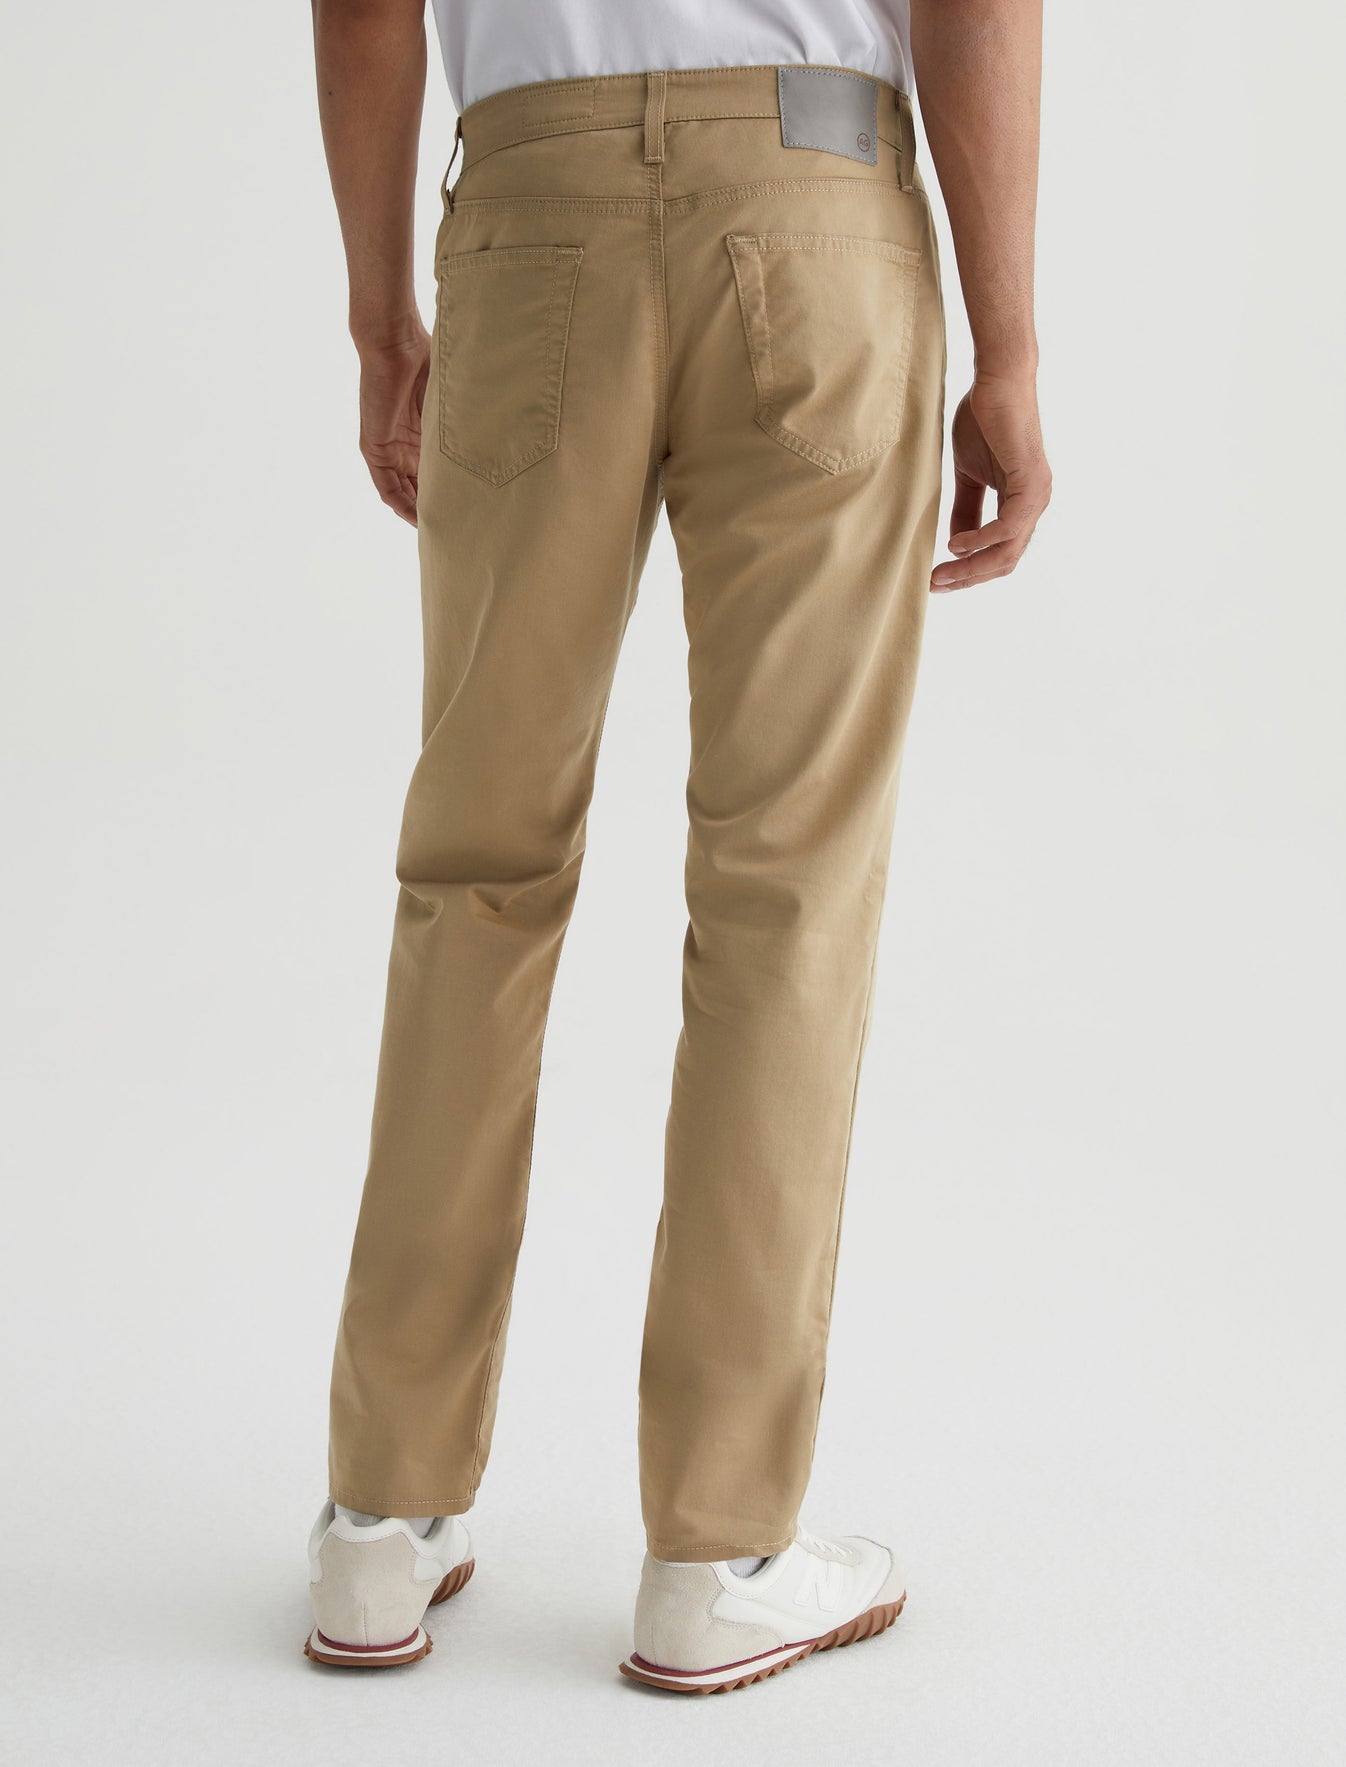 Women's High-Rise Tapered Ankle Chino Pants - A New Day™ Tan XL